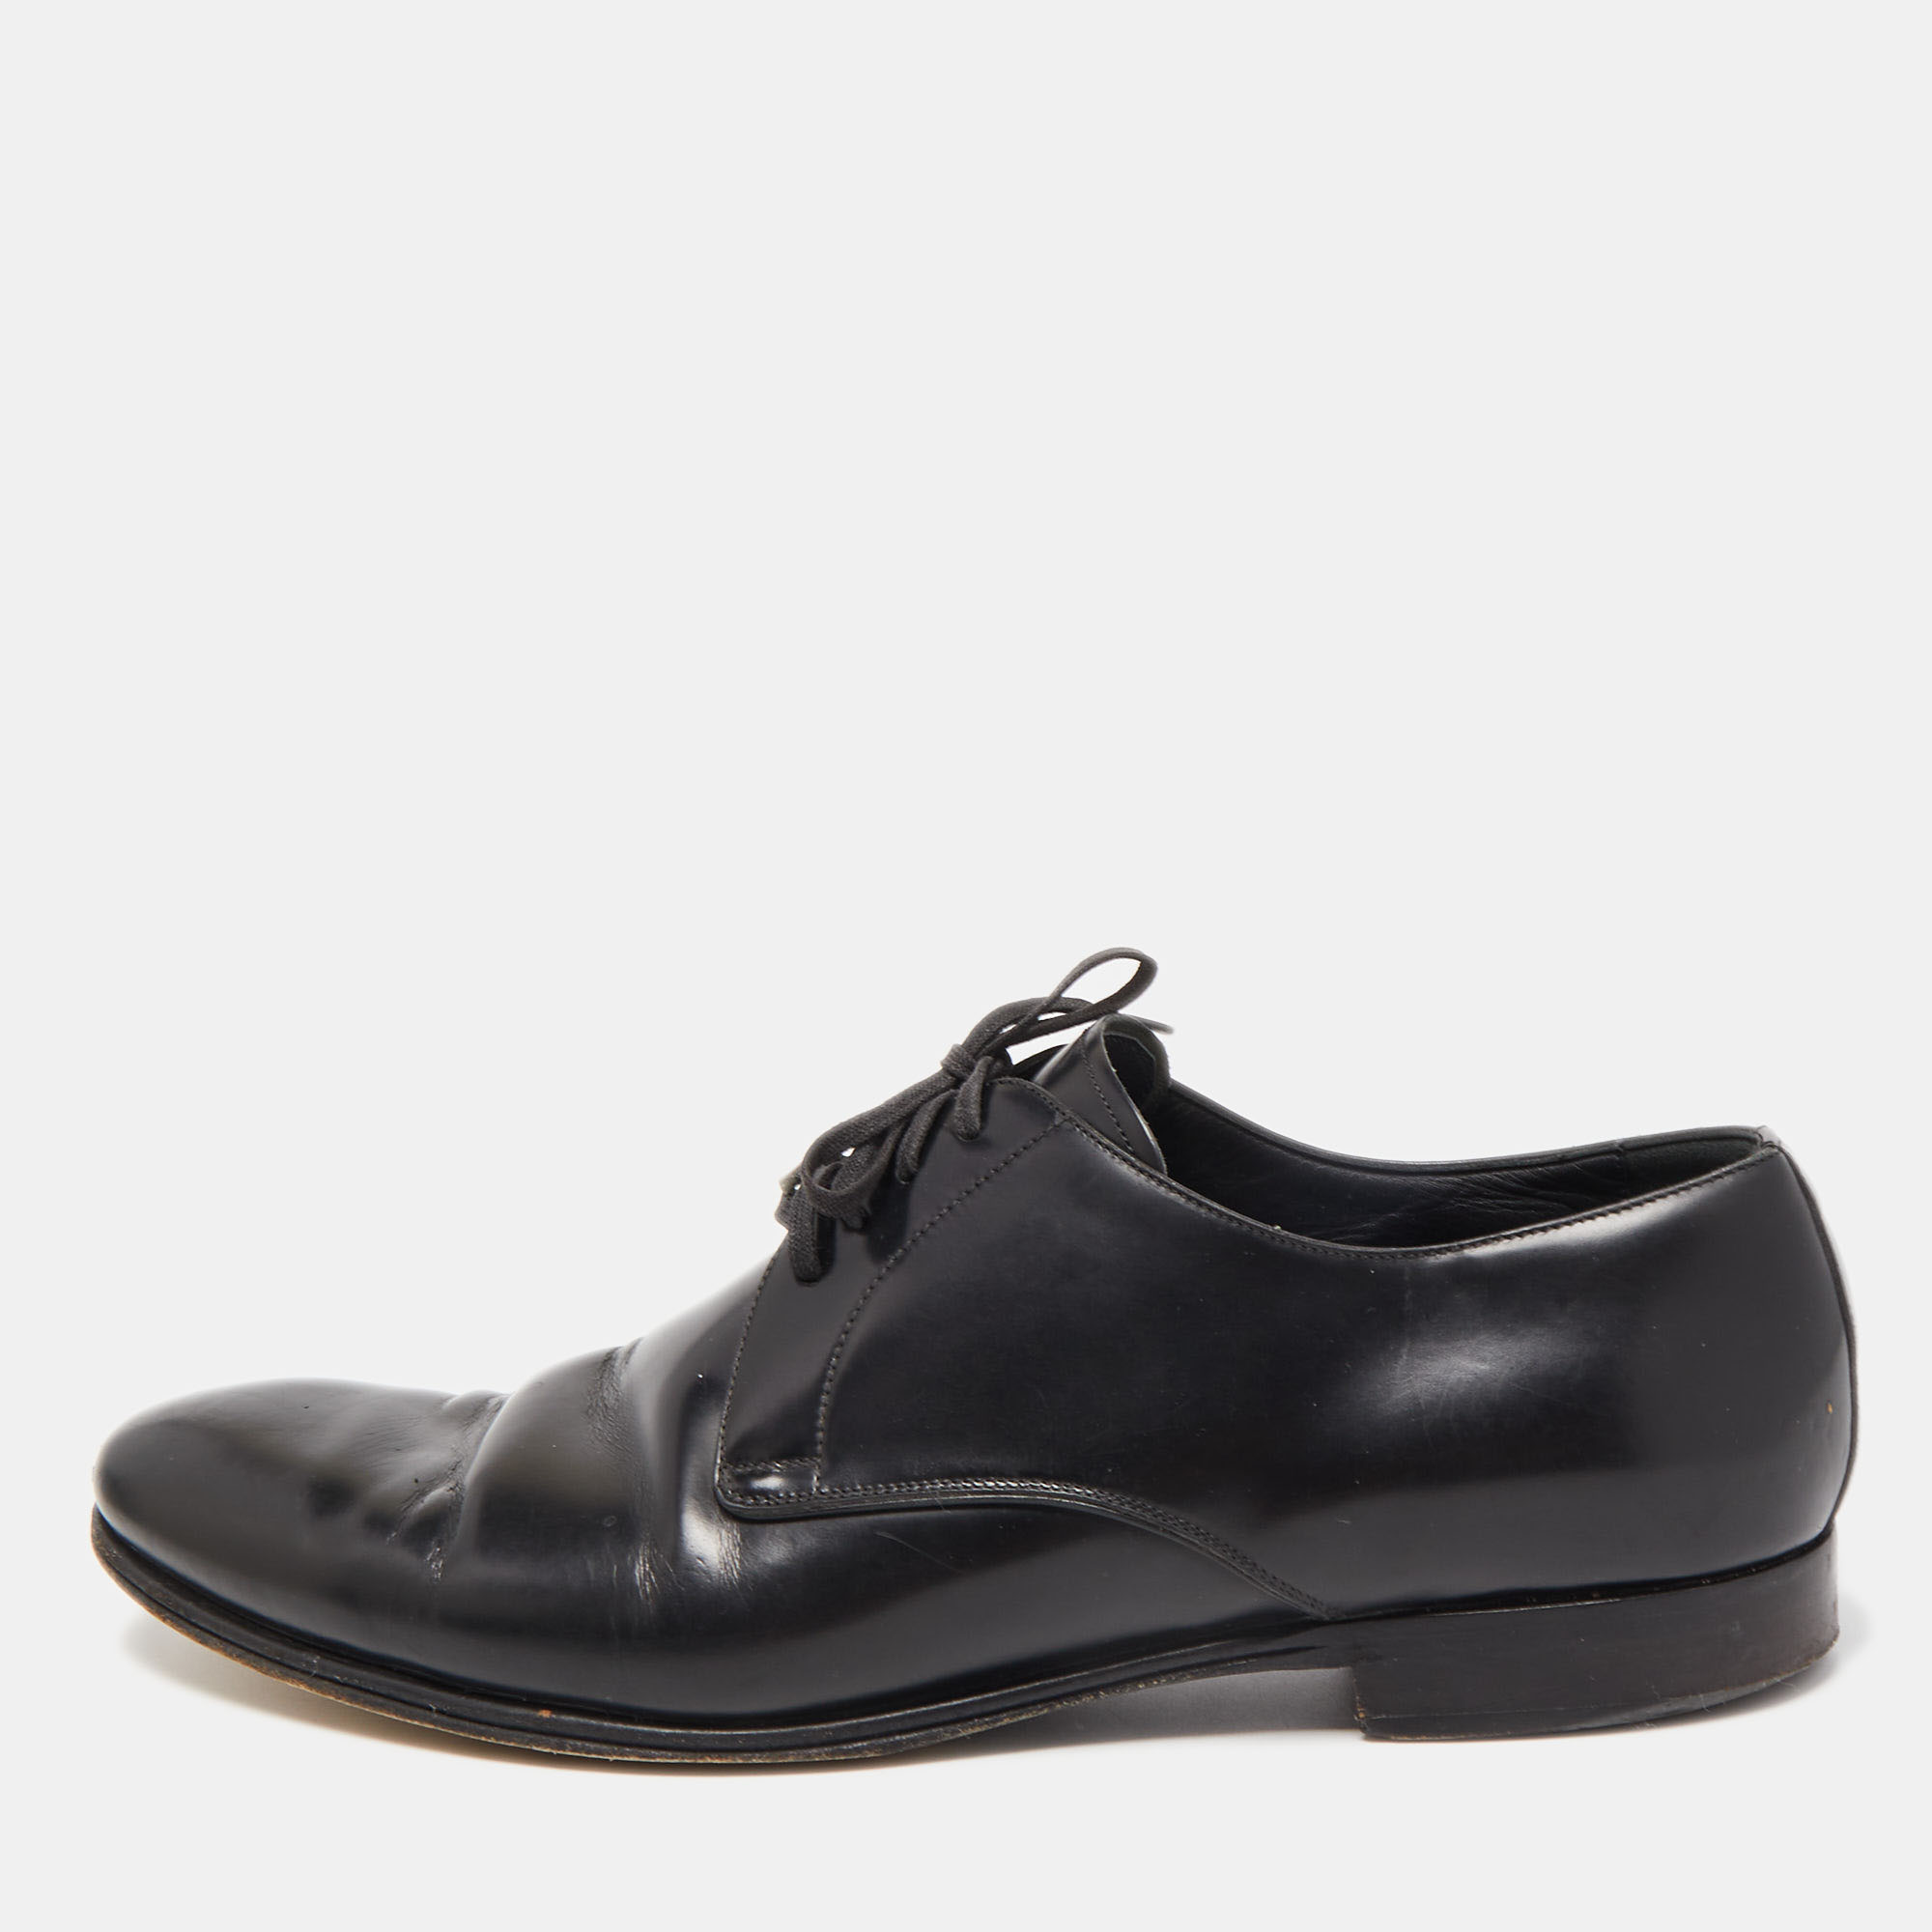 Pre-owned Dolce & Gabbana Black Leather Lace Up Oxford Size 44